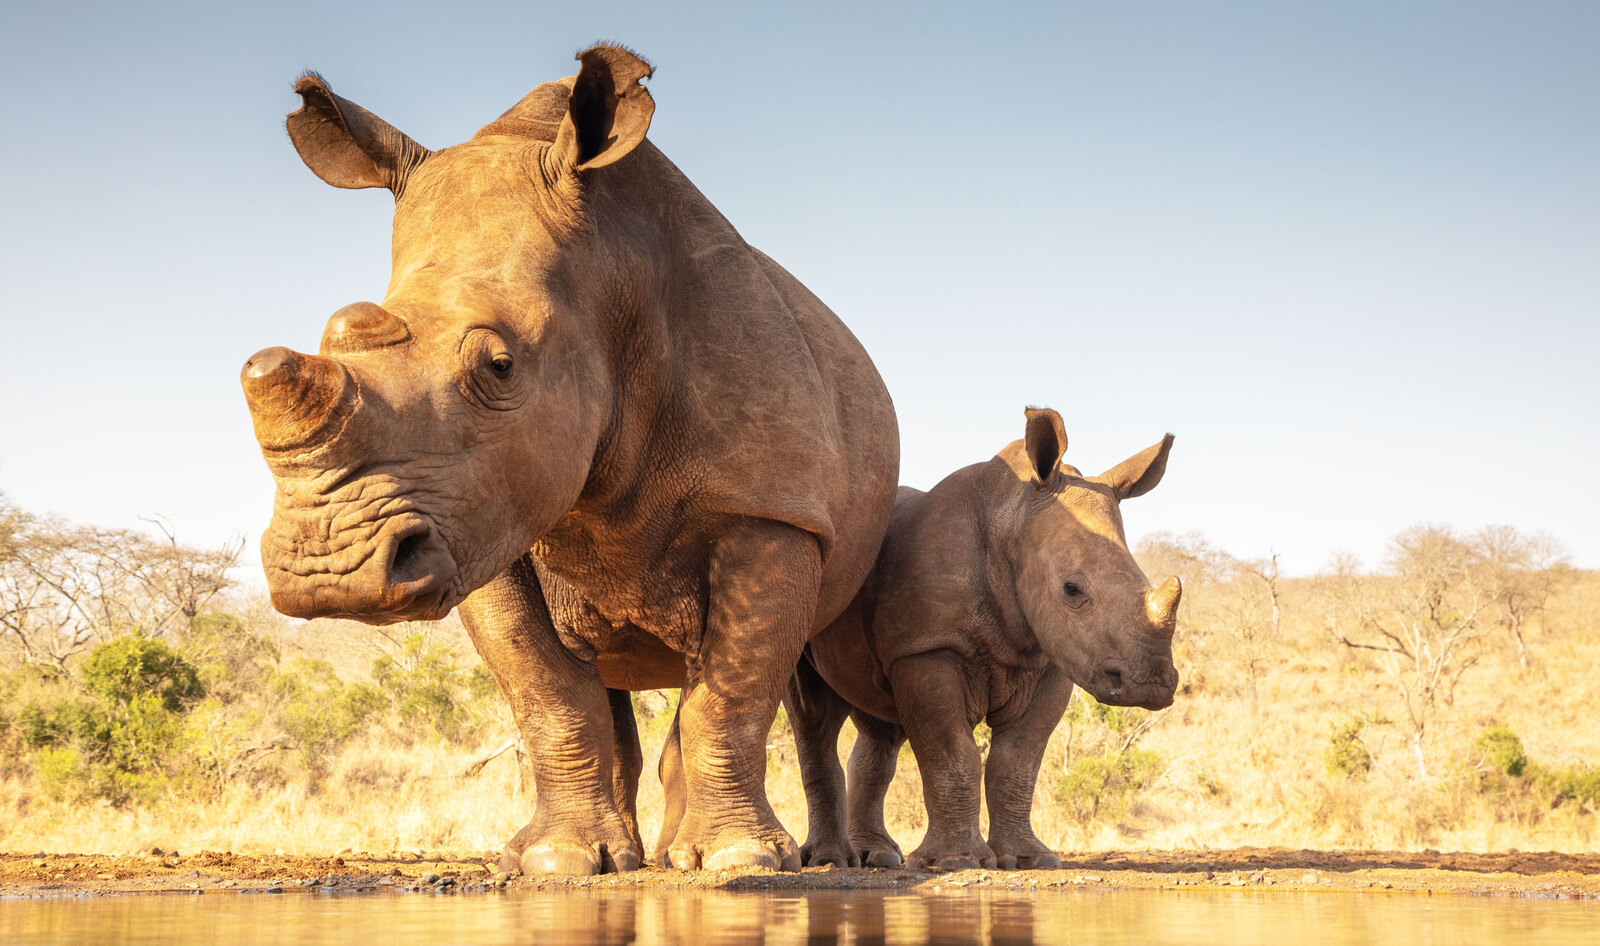 All Vietnam Airlines Passengers Must Now Watch a Video About Rhino Horn